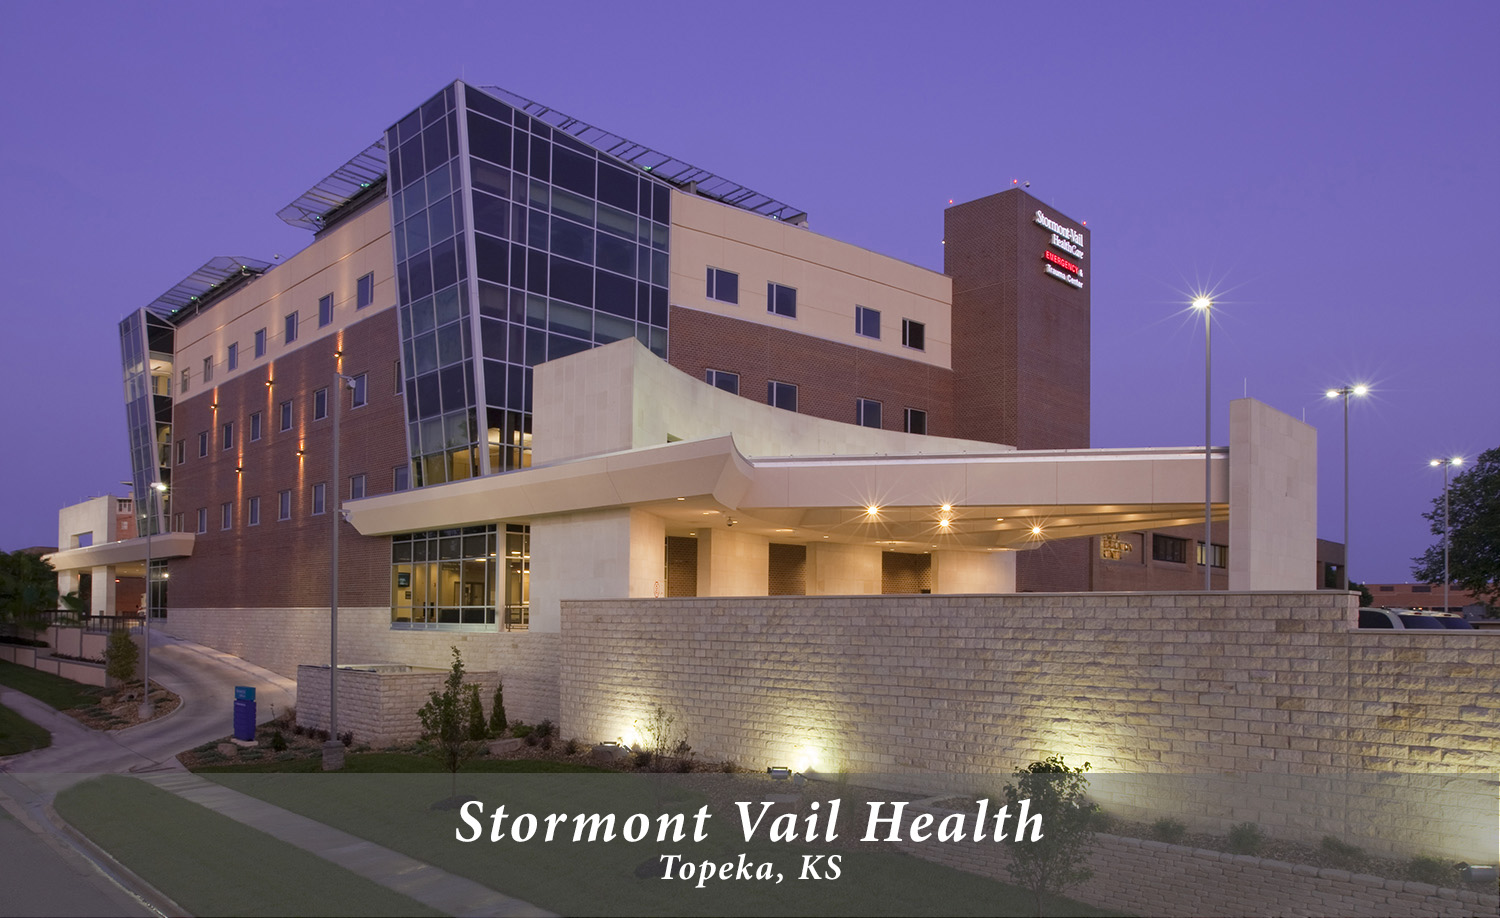 Stormont Vail Health with text.jpg